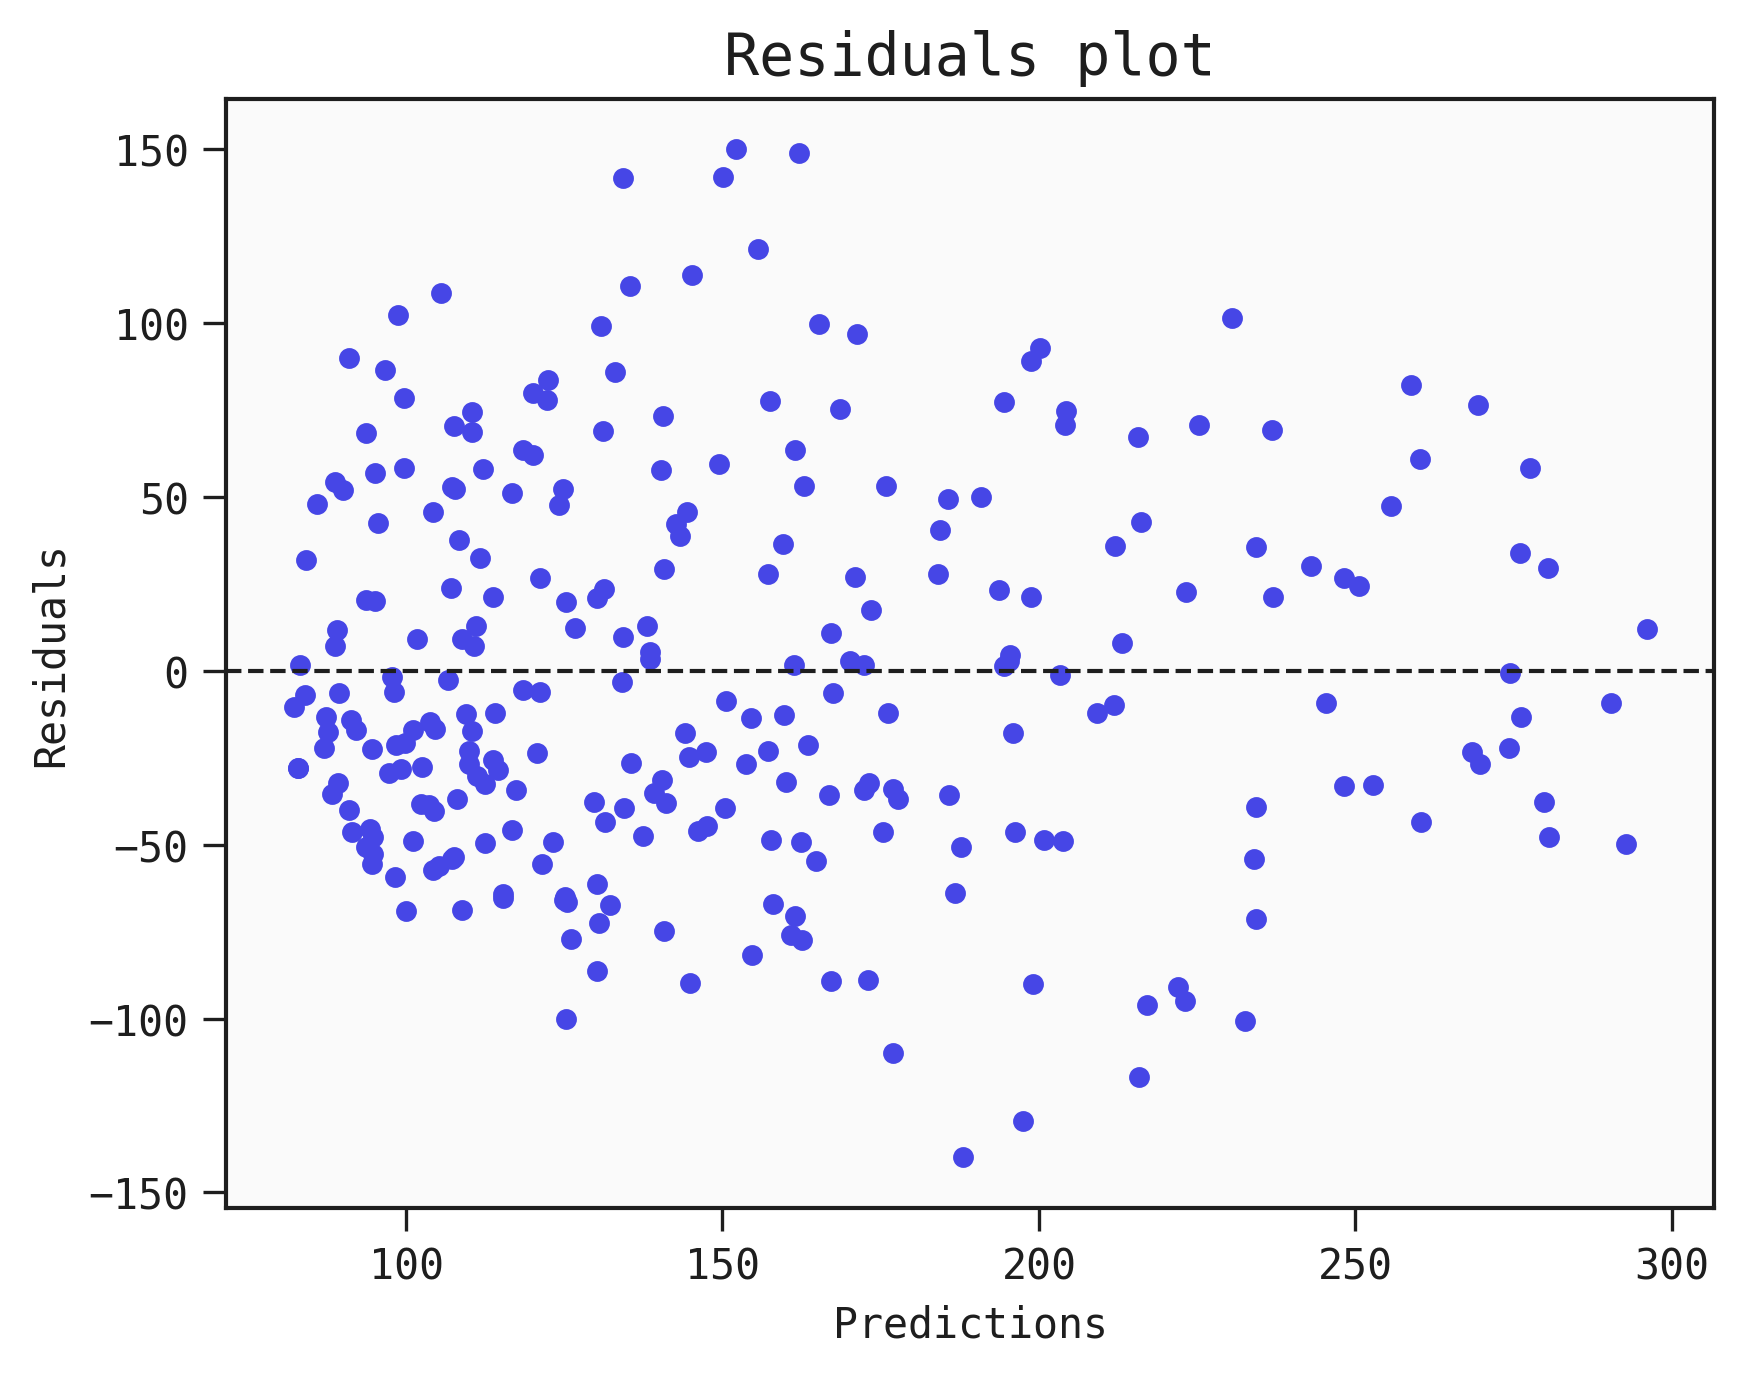 Residuals plot showing the distribution of the errors